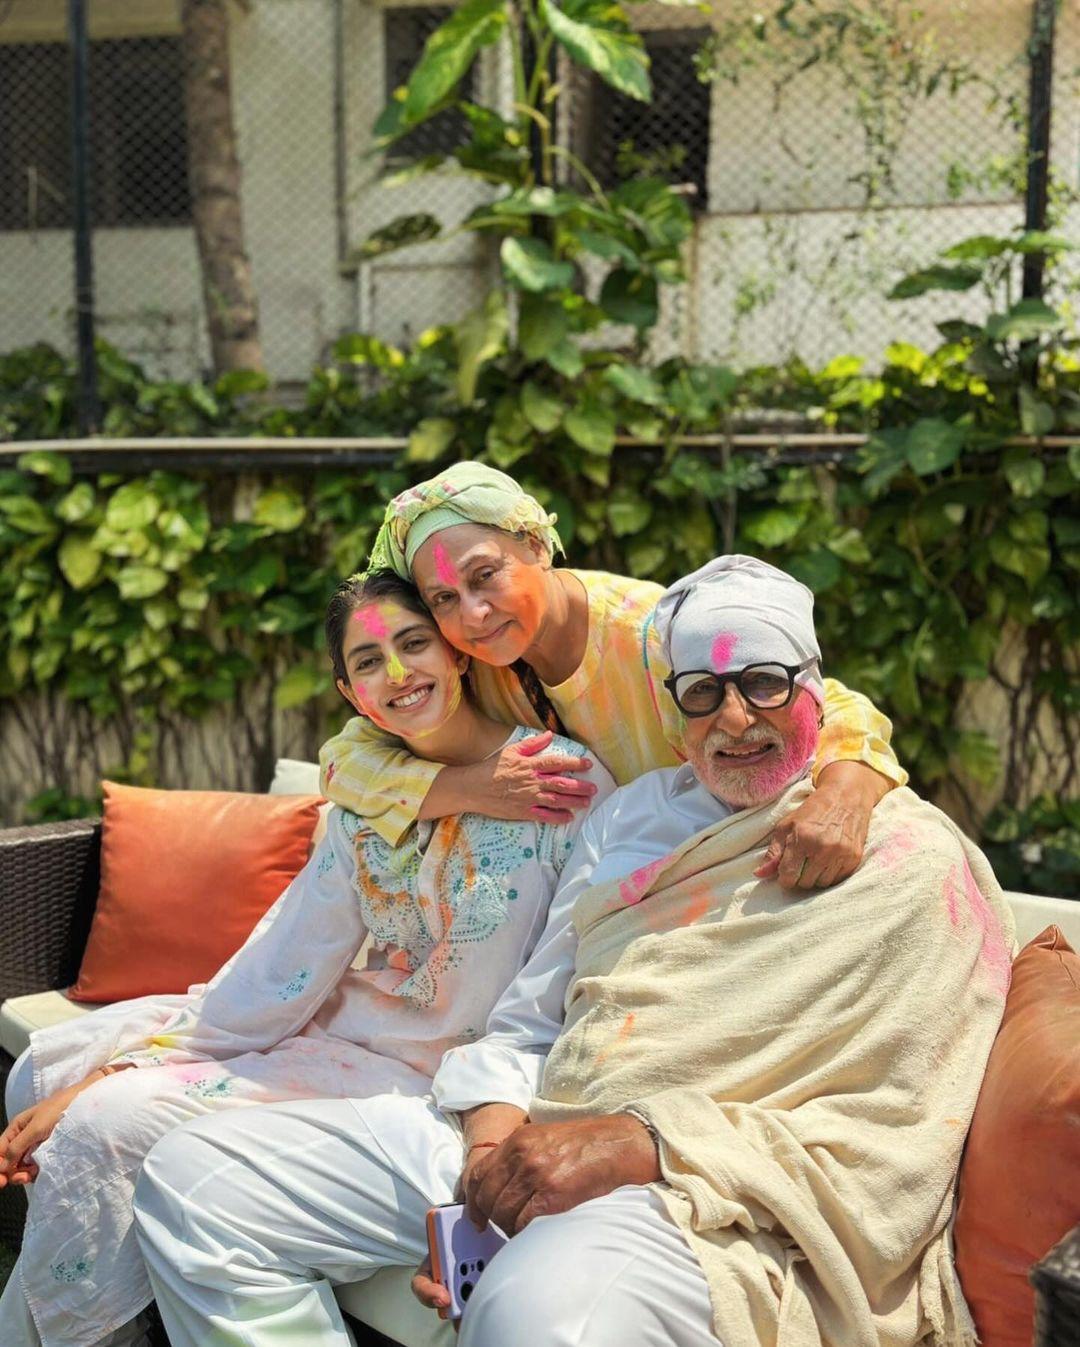 Bachchan Parivaar's Holi was full of laughter and smiles. The entire family came together to celebrate the function. In this picture, filled with colours, Jaya Bachchan, Amitabh Bachchan, and Navya Nanda strike a pose together